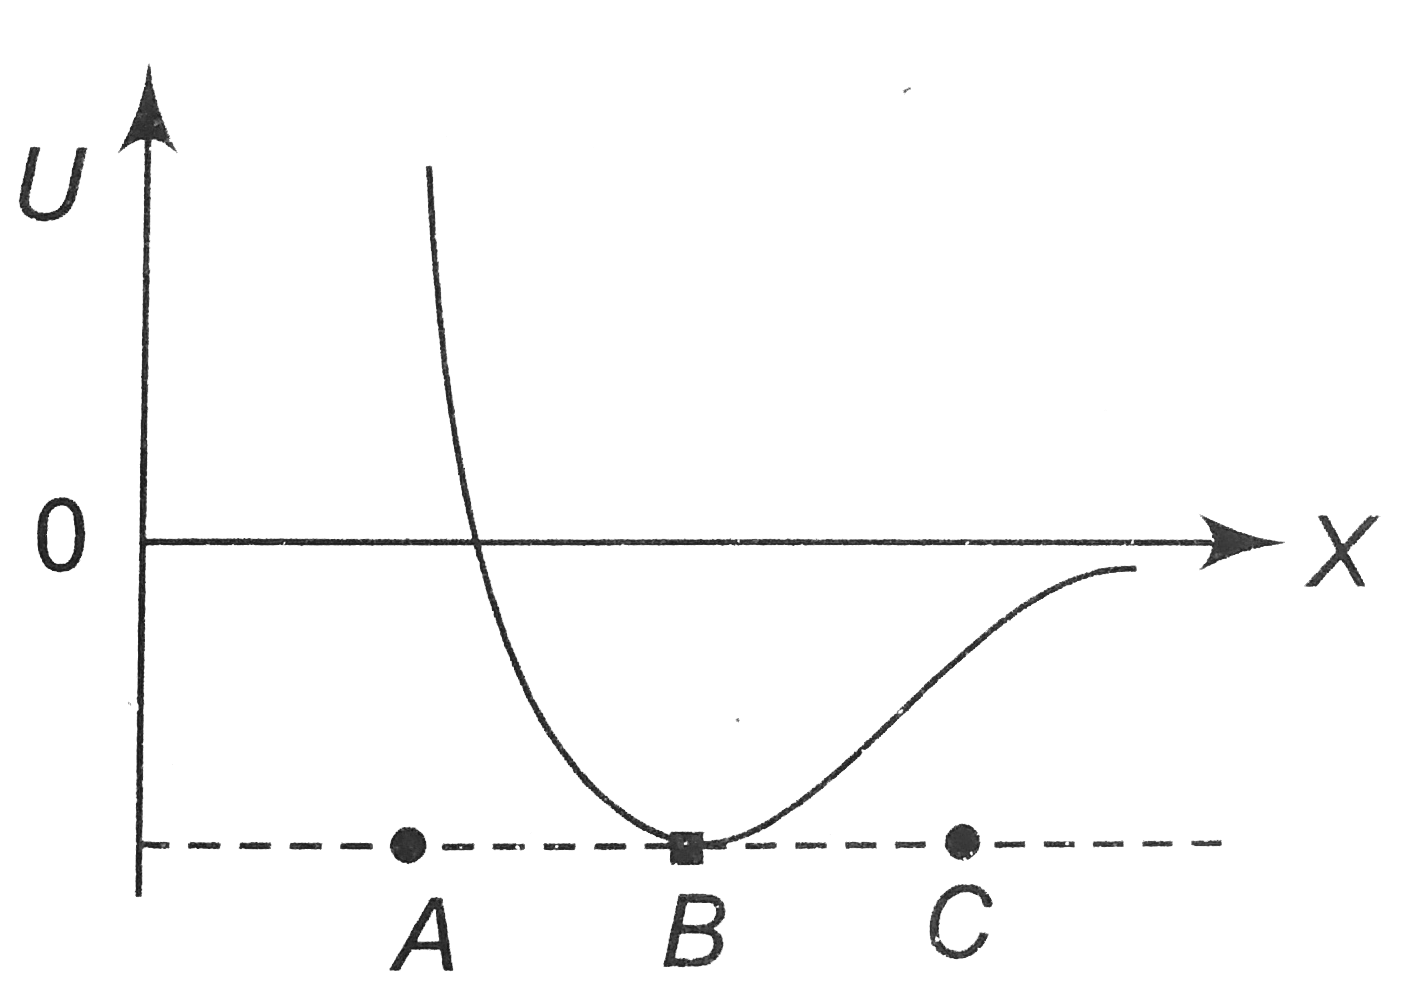 The potential energy U between two molecules as a function of the distance X between them has been shown in the figure. The two molecules are